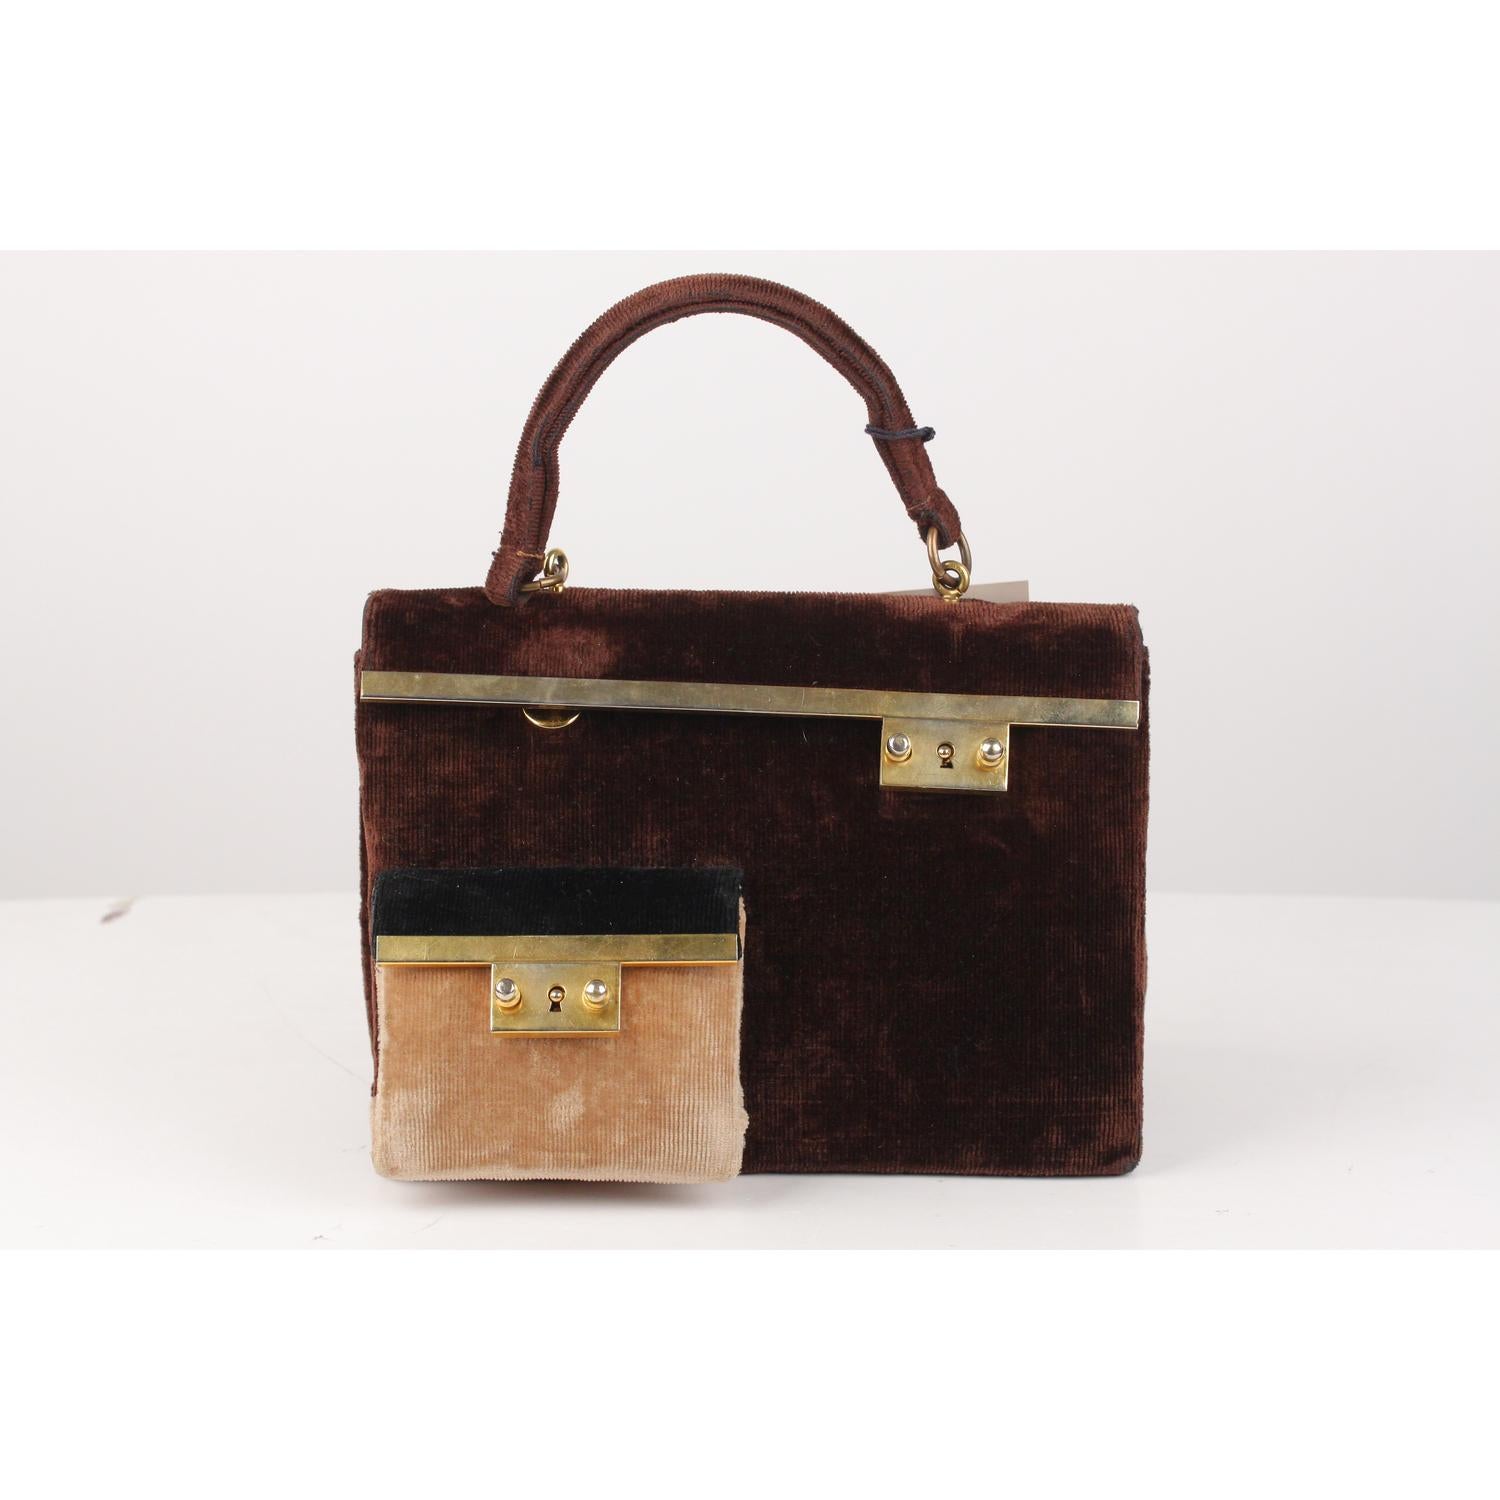 Roberta Di Camerino brown, beige and black velvet handbag with matching coin purse. It features a small compartment on the front with keyhole detailing. Button closure and single top carry handle. Leather lined interior with 2 main sections and 1